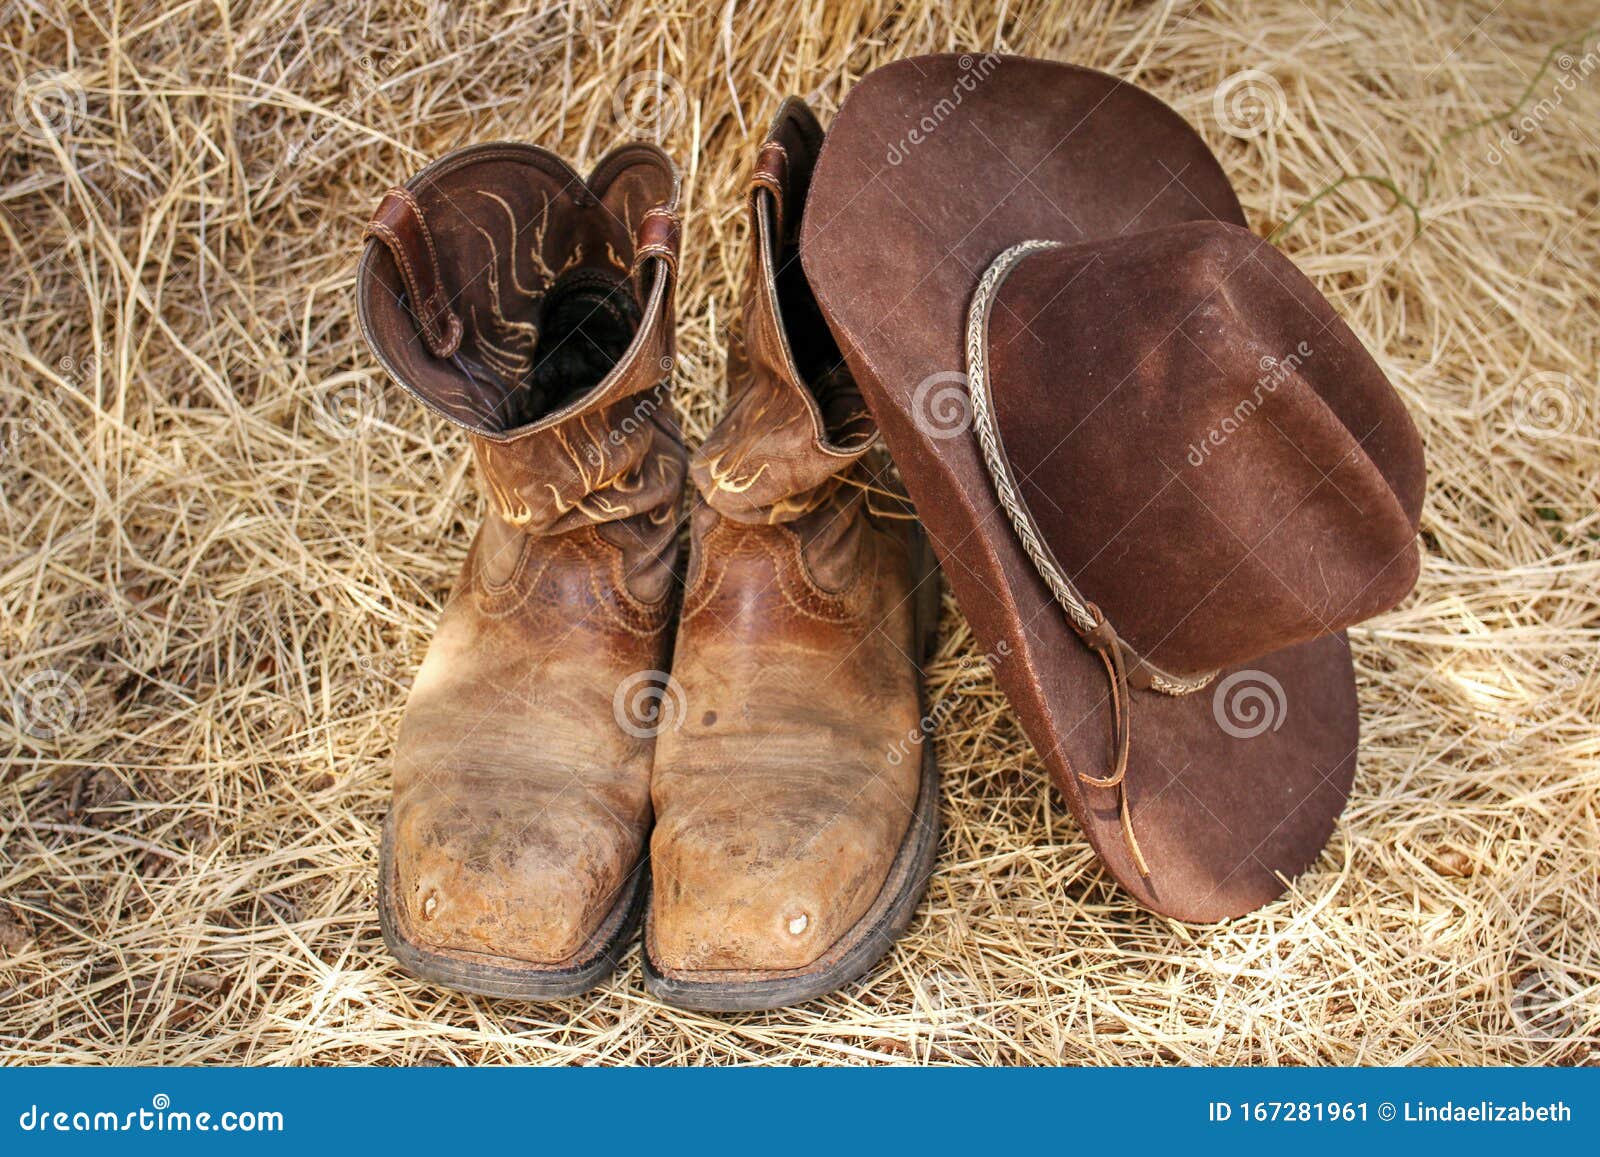 Old Cowboy Boots And Hat On Background Of Hay Stock Image - Image of ...